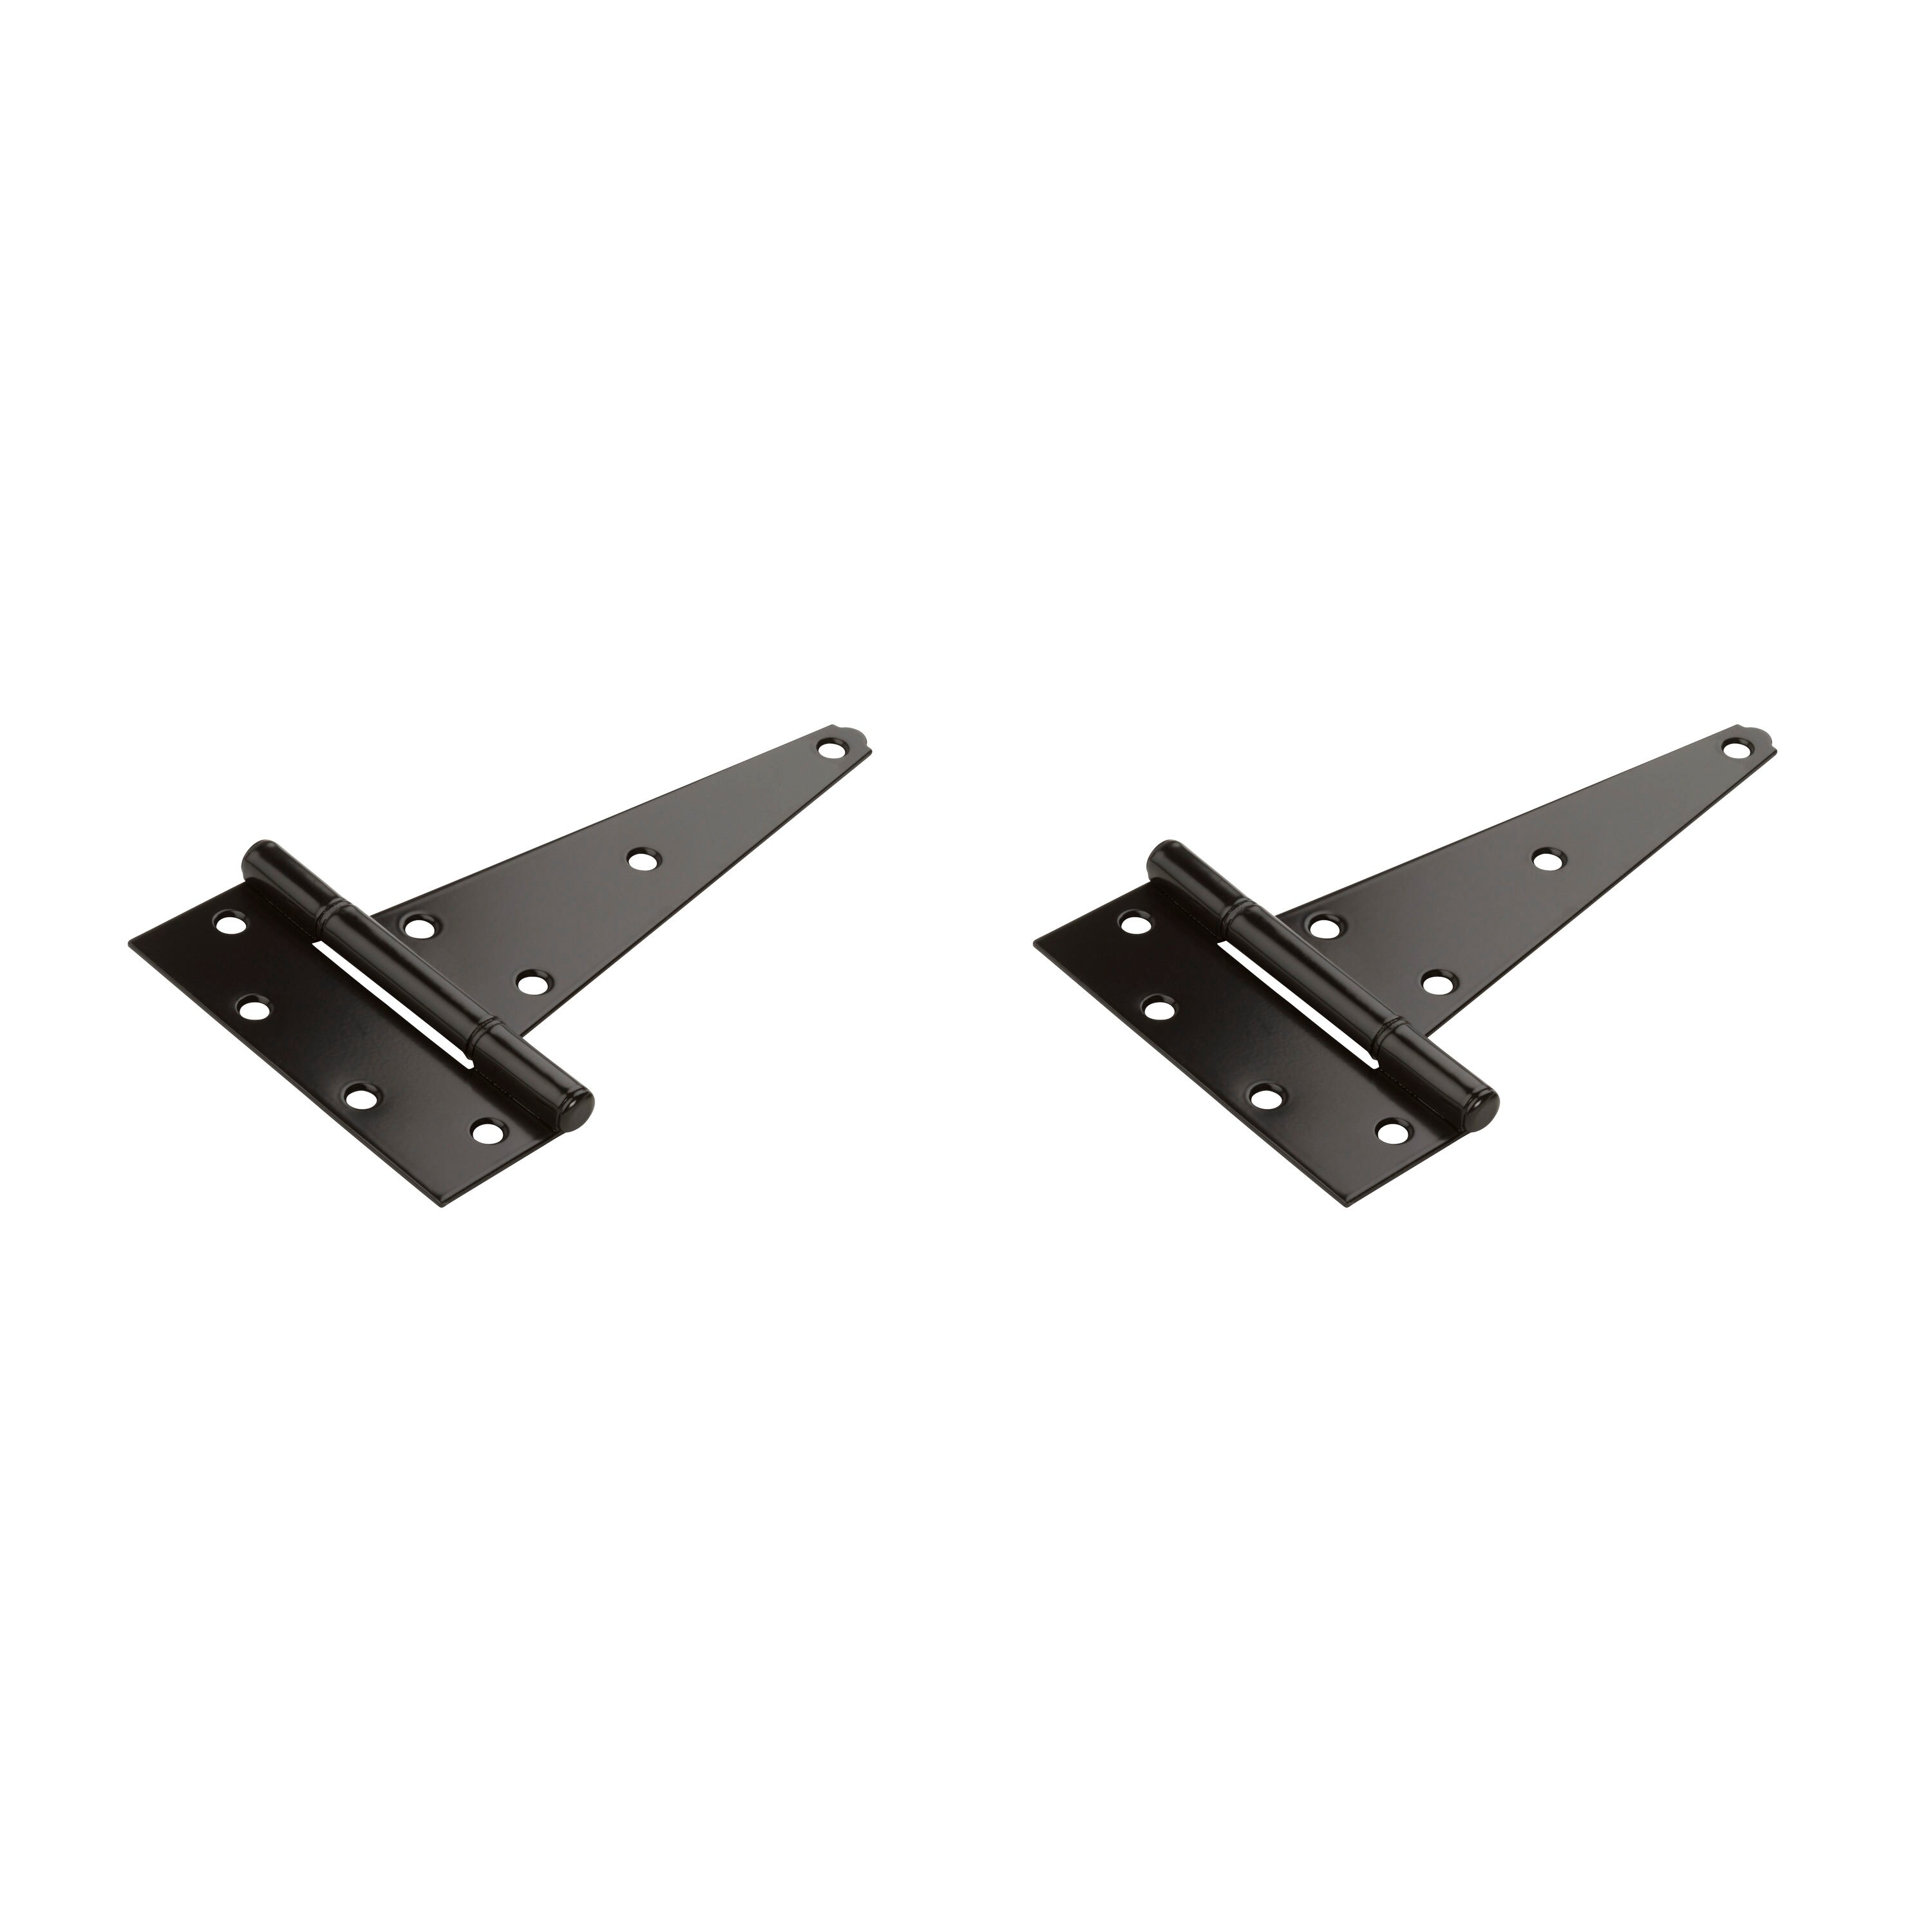 2 pack National Hardware N129-080 V286 Extra Heavy T Hinges in Zinc plated